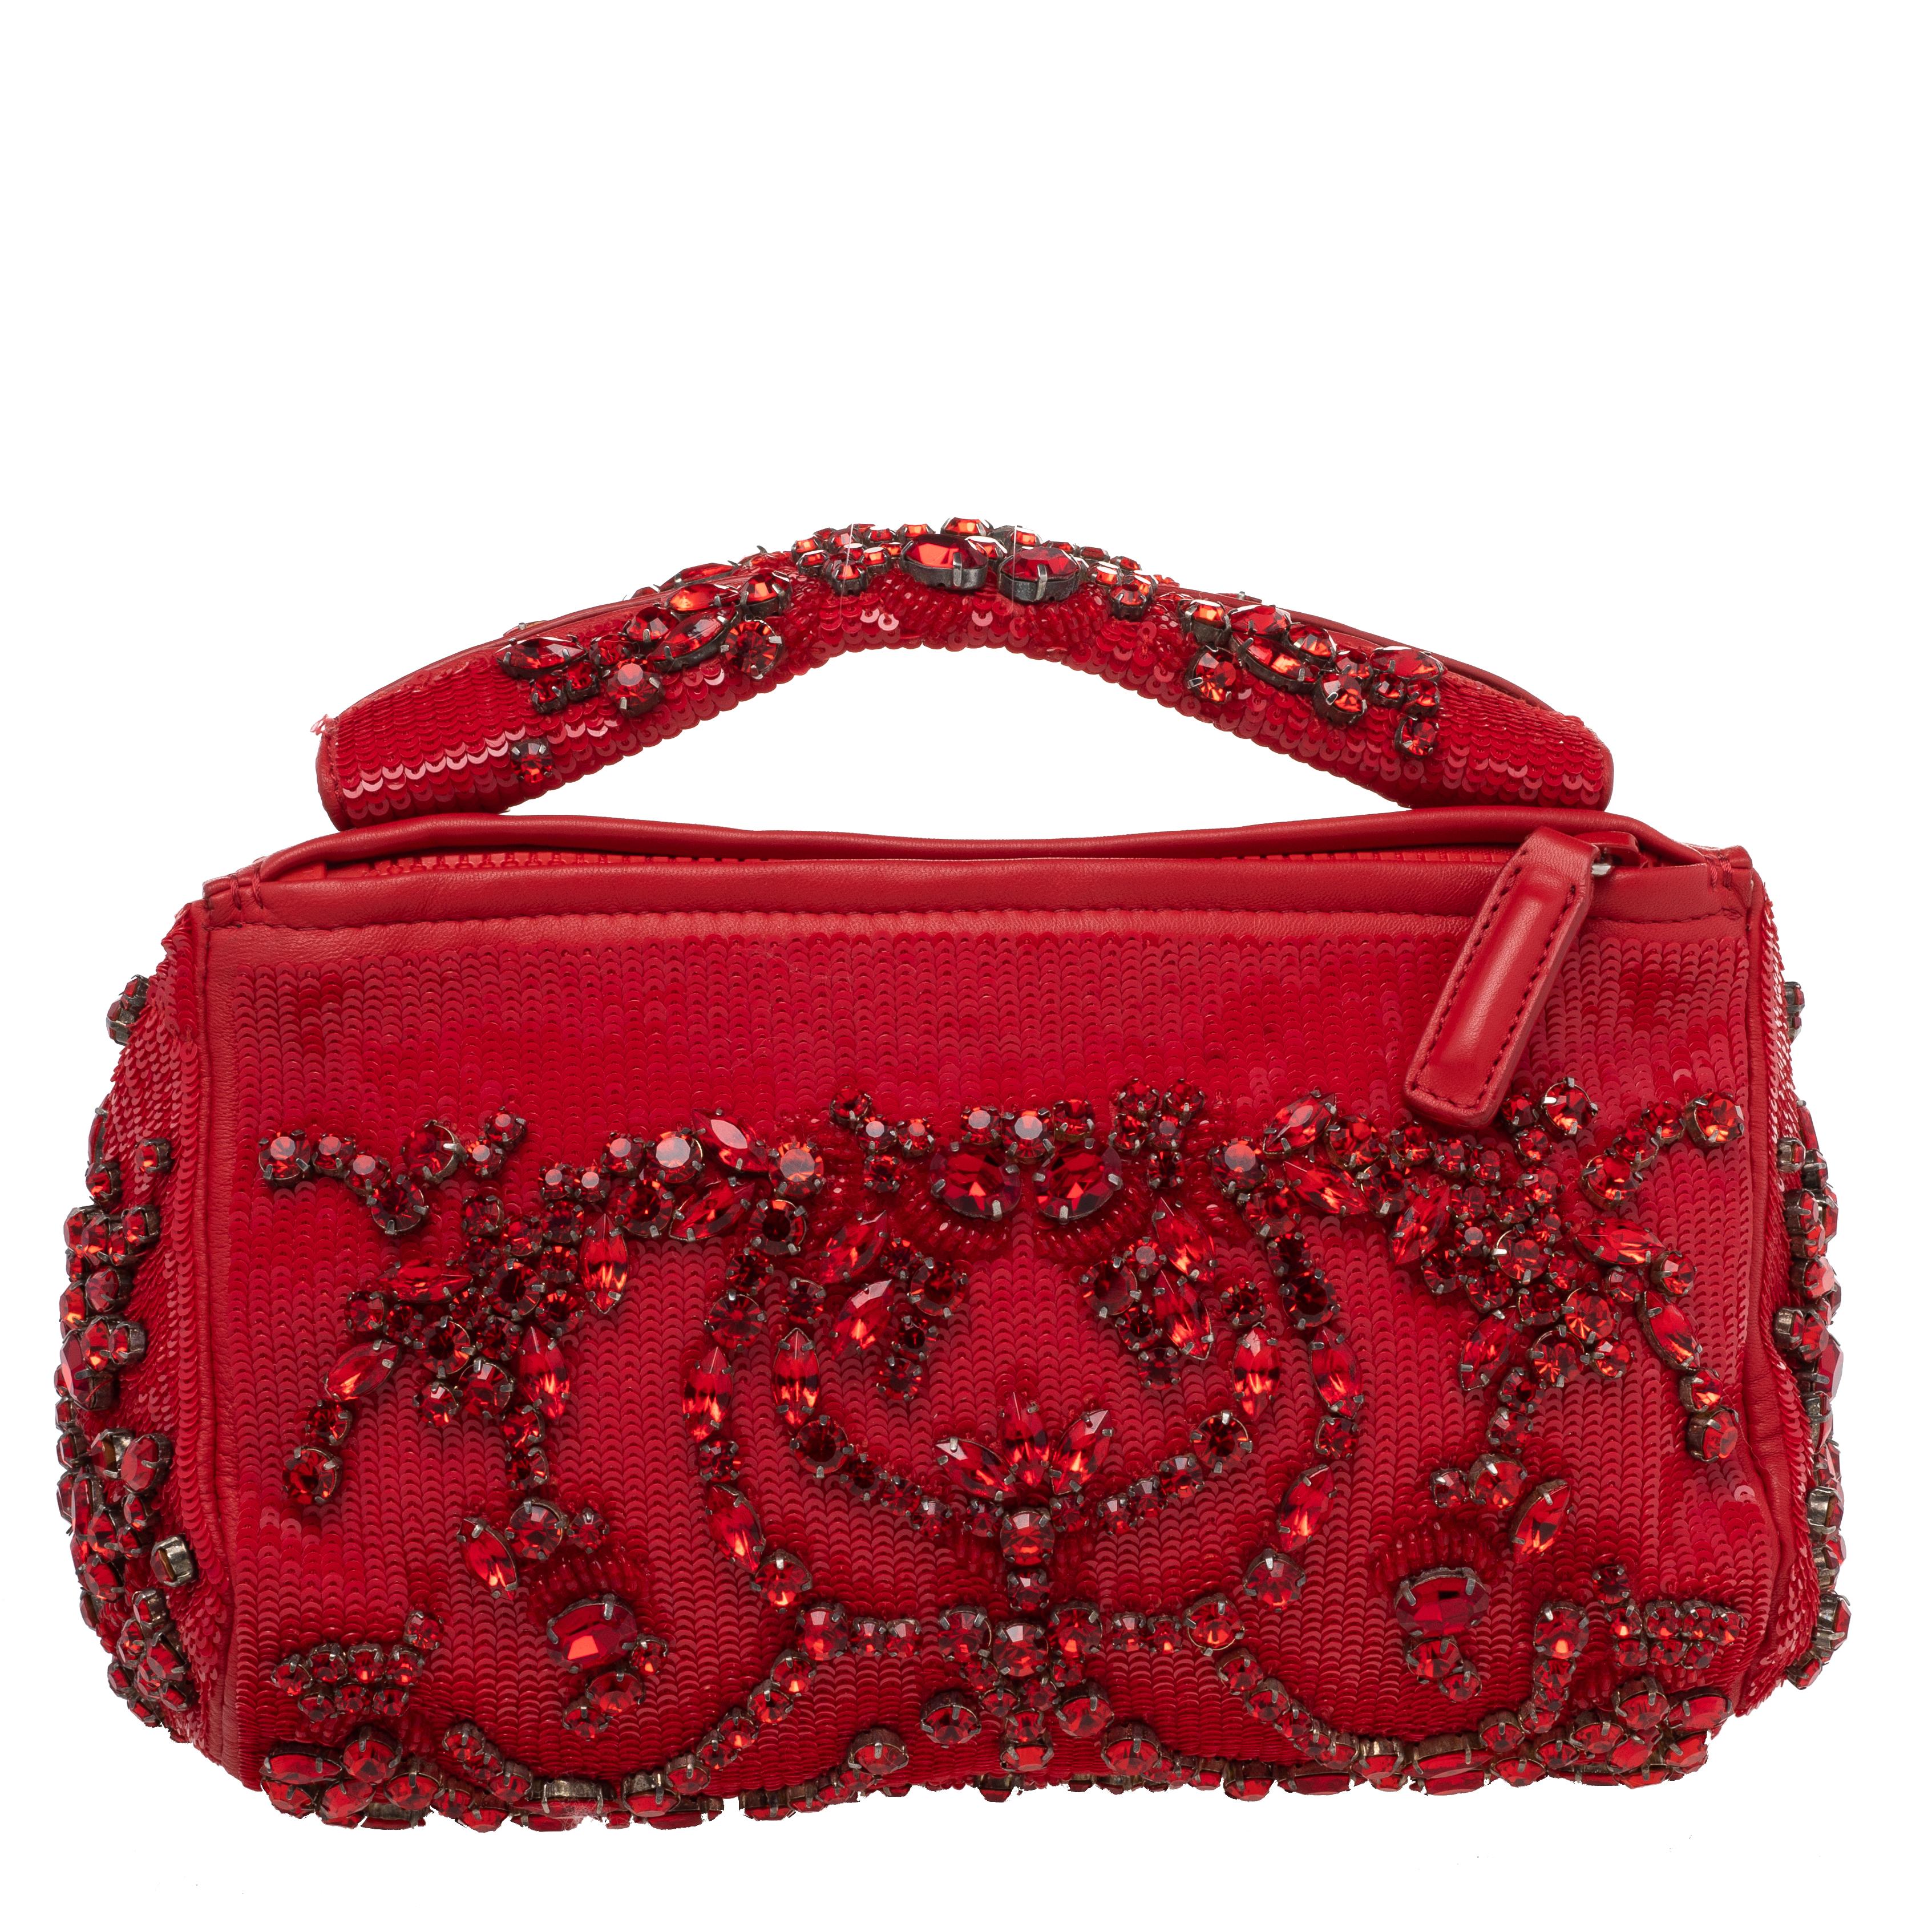 Made by Givenchy, this handbag is a perfect balance of elegance and practical utility. Simply sophisticated, this sequined bag flaunts beautiful crystal embellishments all over. Stow all your party essentials in the fabric and leather interior. It